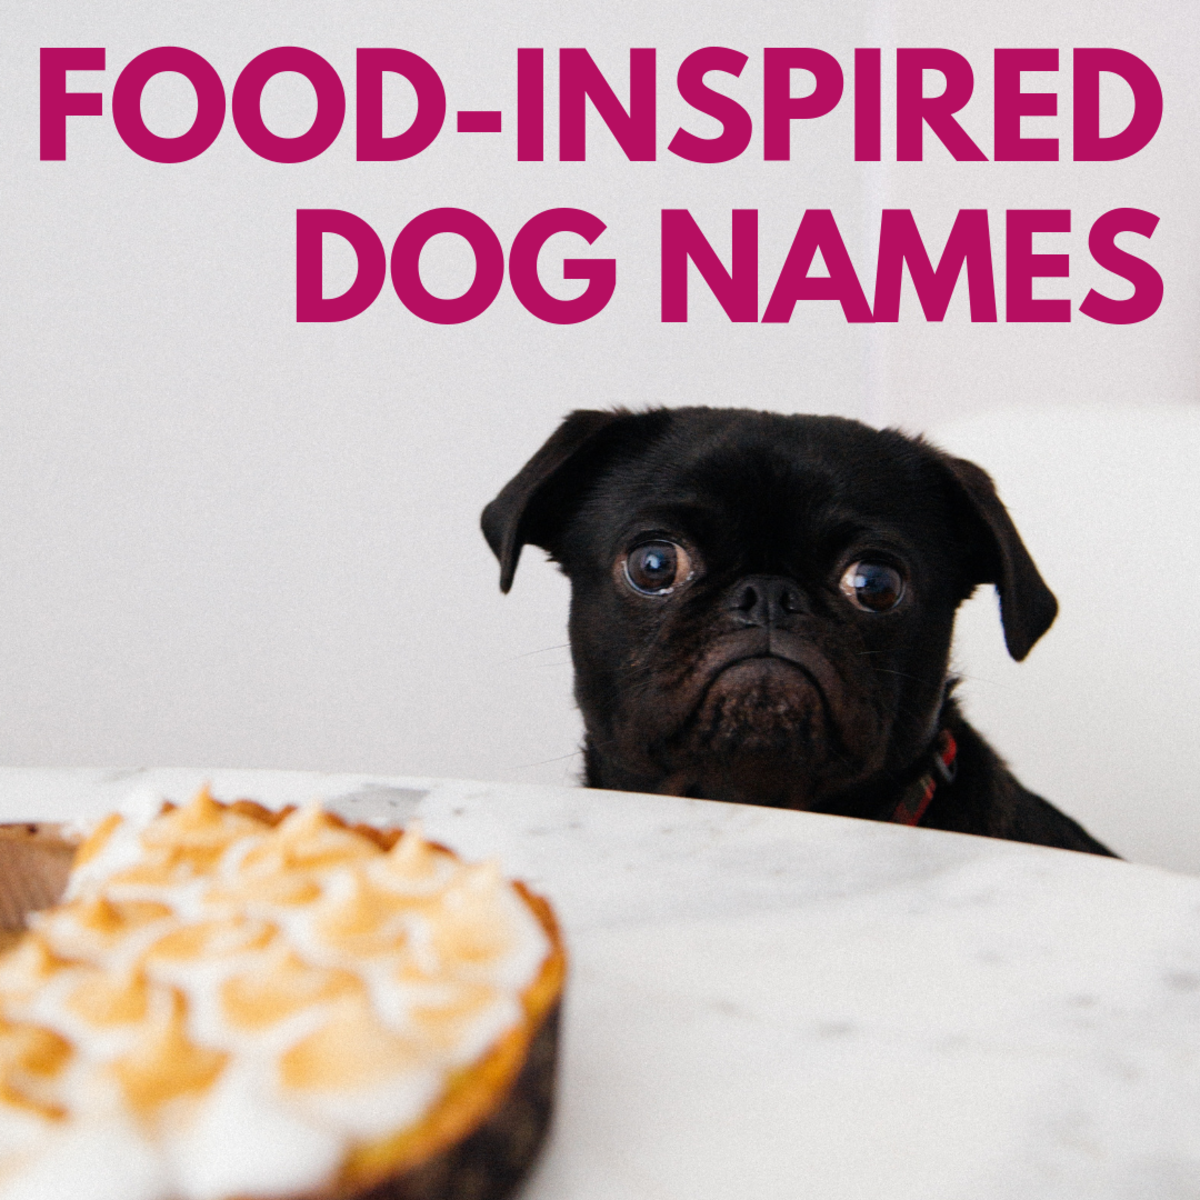 200+ Delicious Food Names for Dogs (and Foodies)